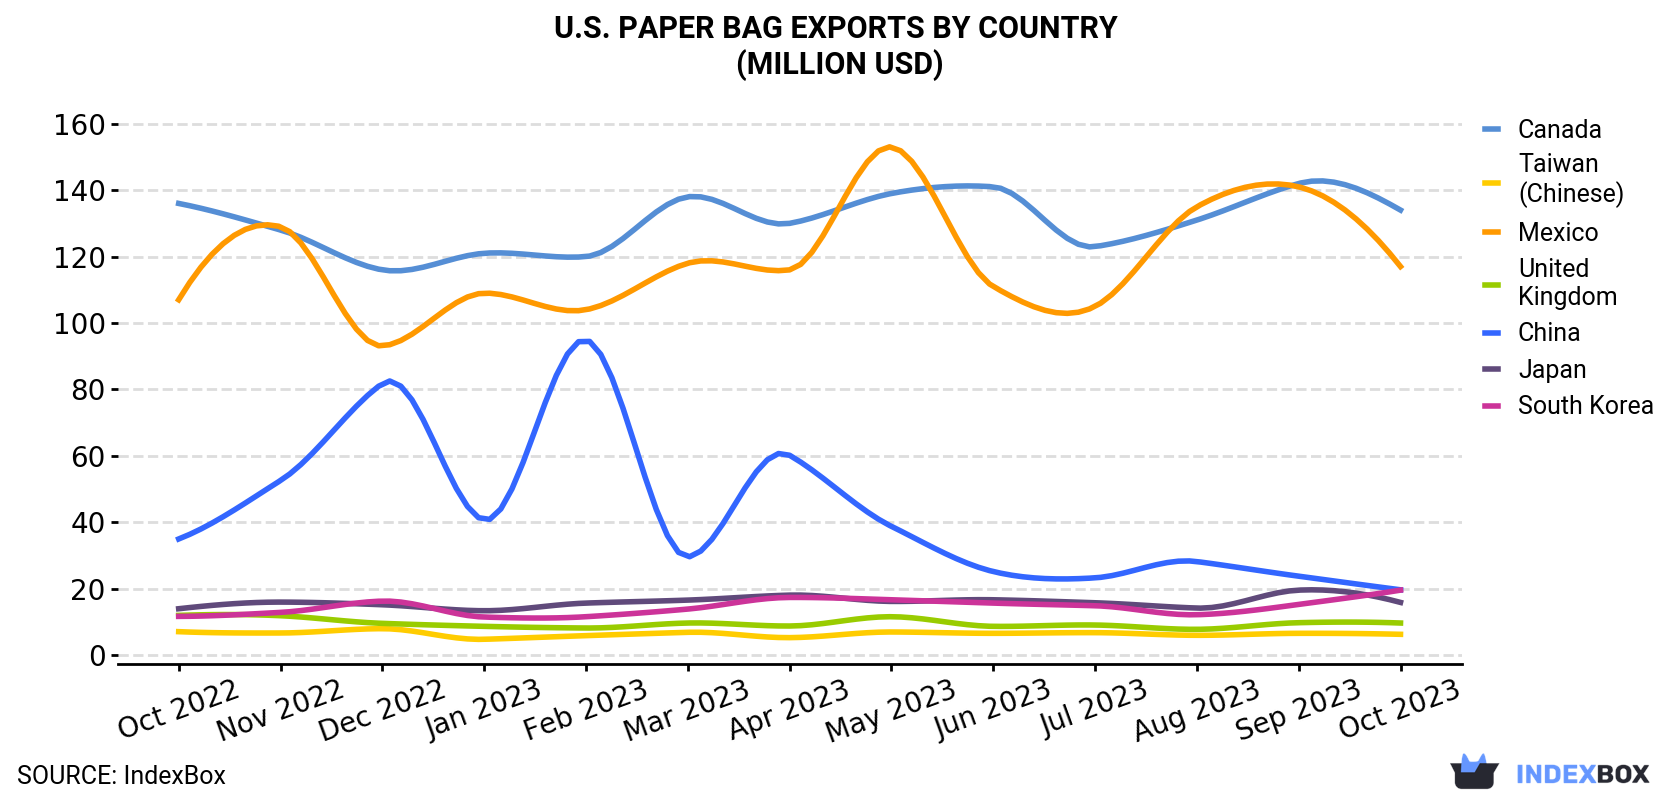 U.S. Paper Bag Exports By Country (Million USD)